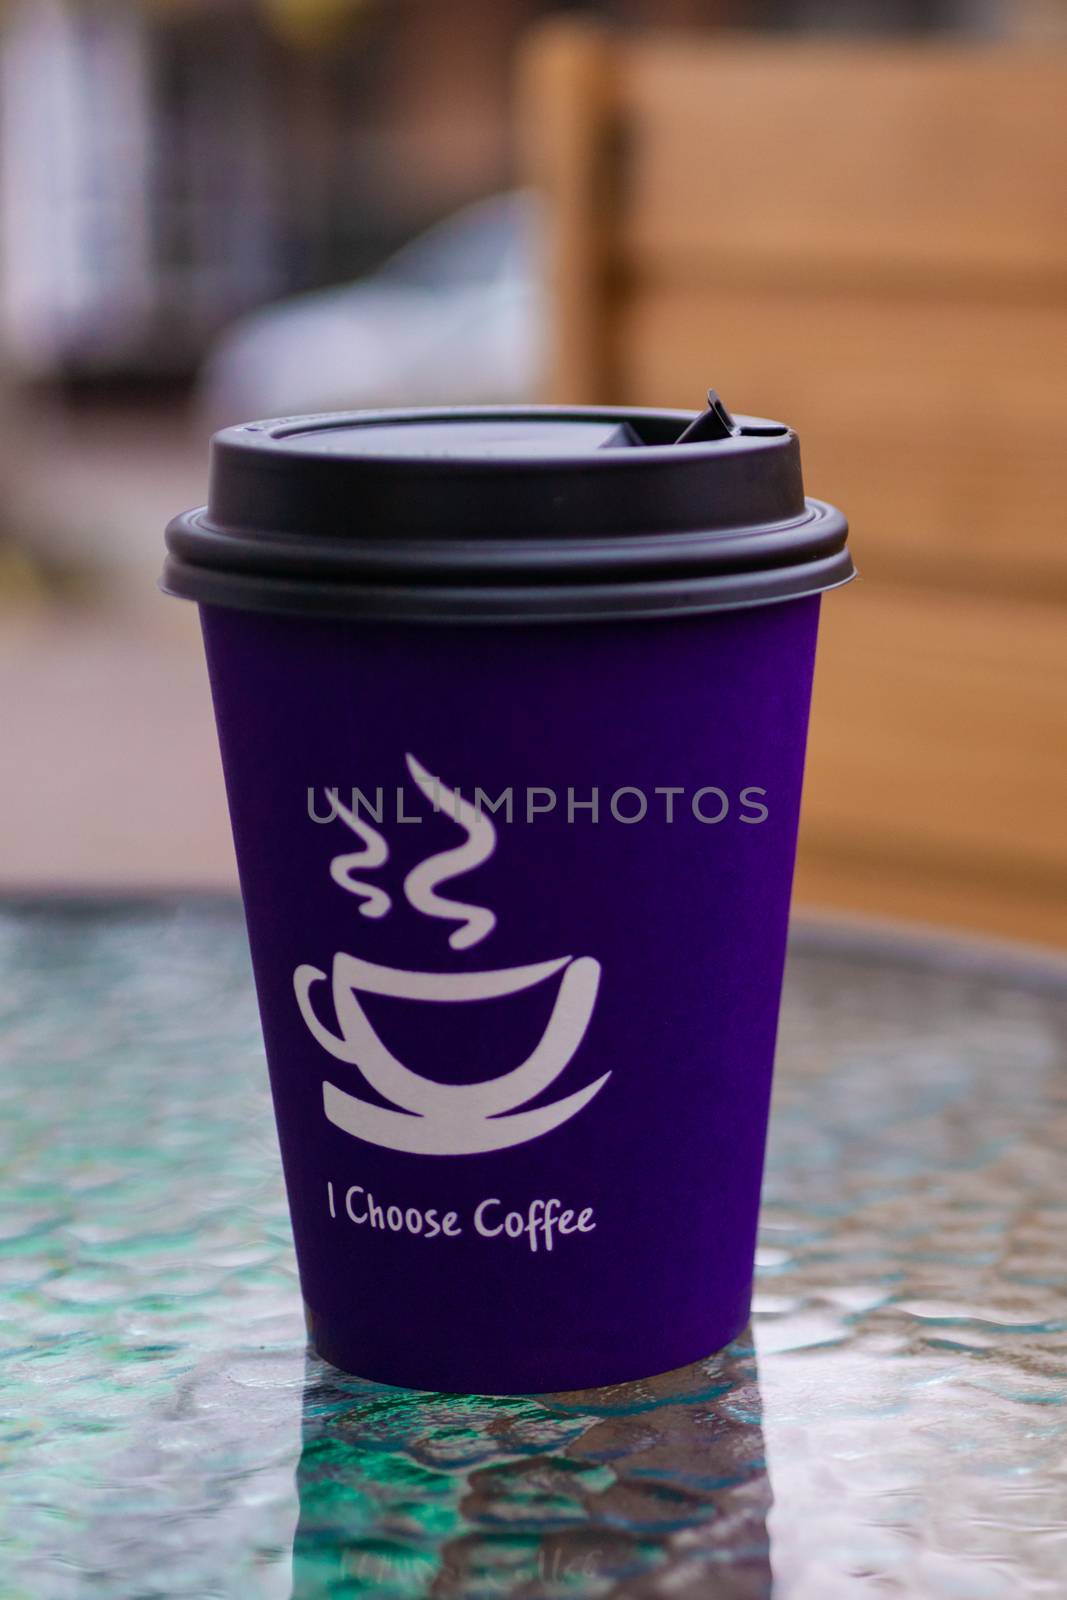 Purple coffee paper cup on glass clear table. On cup wrote: "I choose coffee". Beginning a good day! by alexsdriver